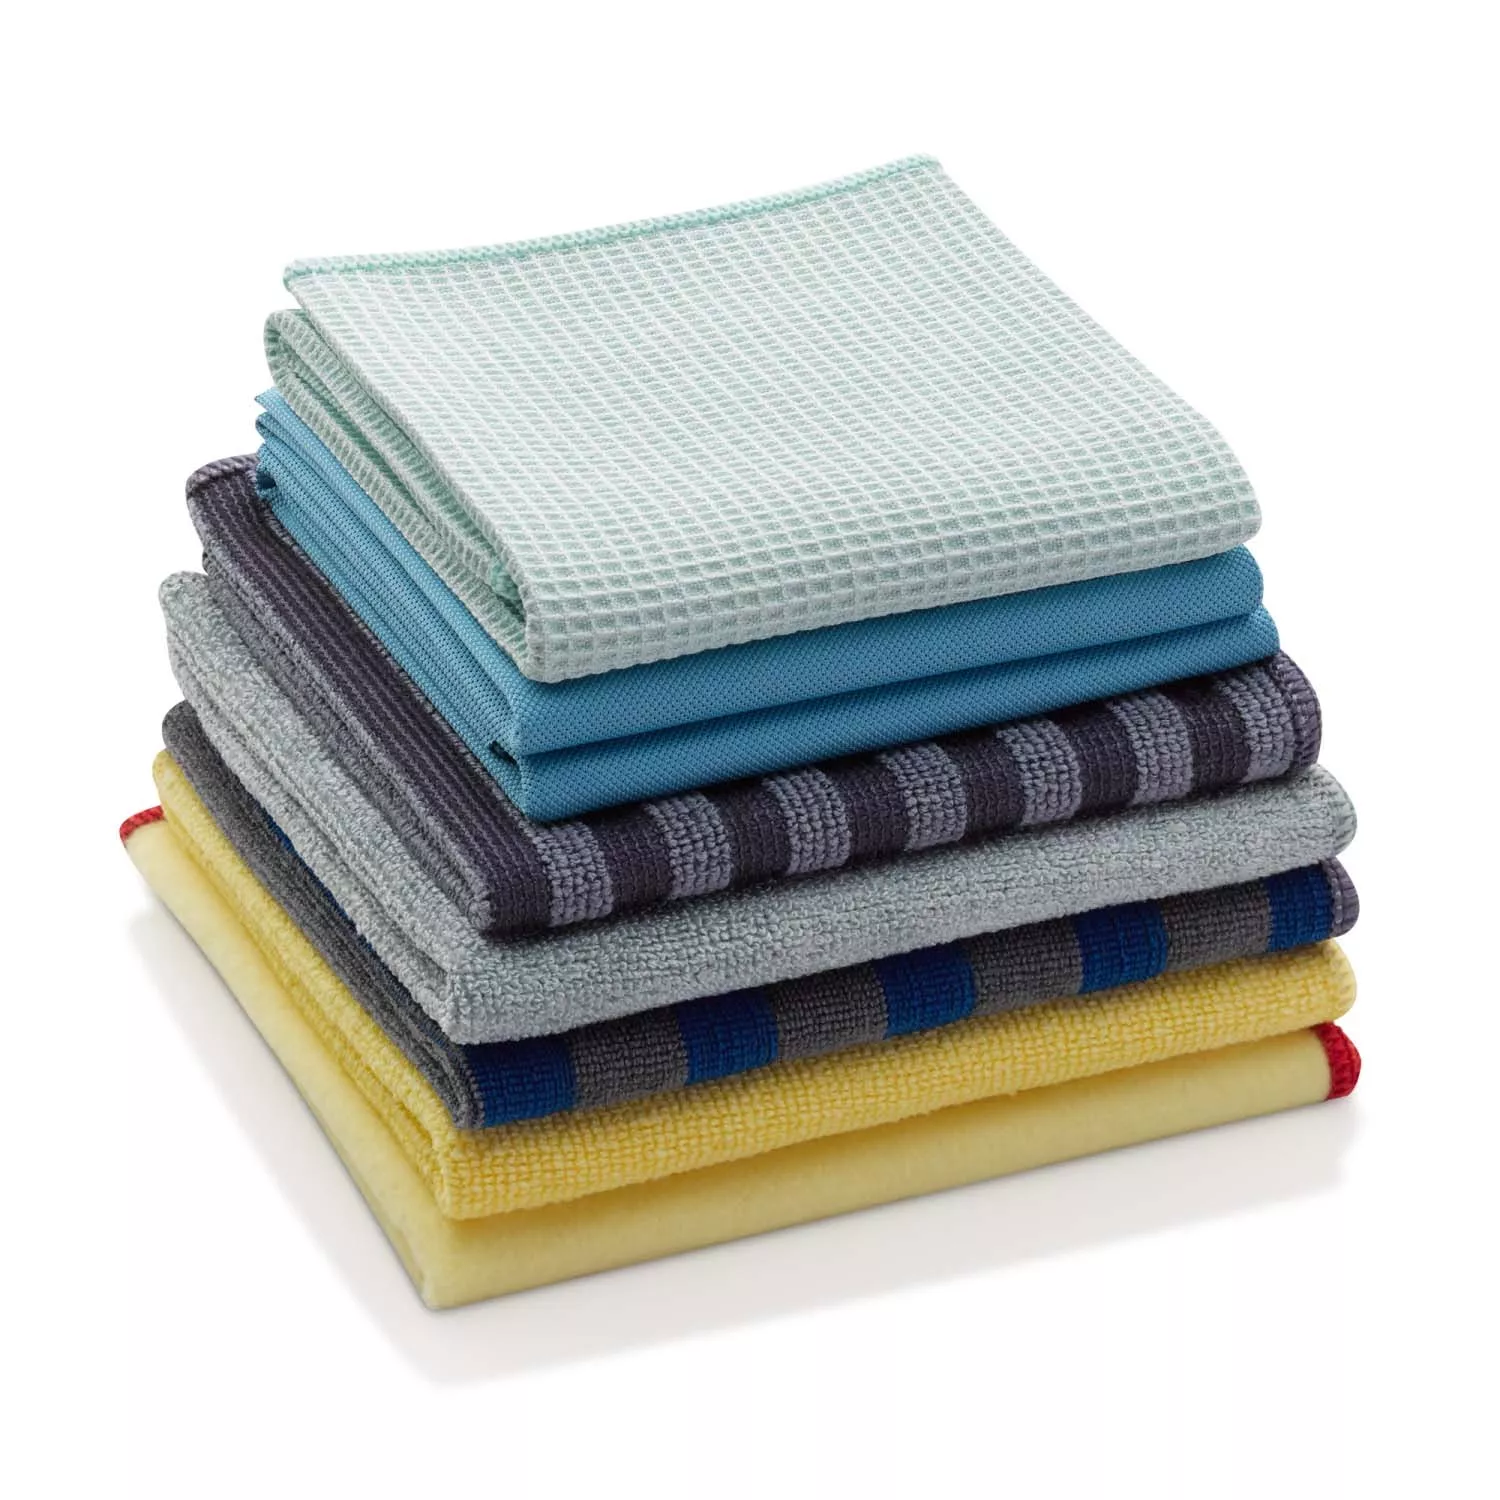 E-Cloth Home Cleaning Pack, Set of 8